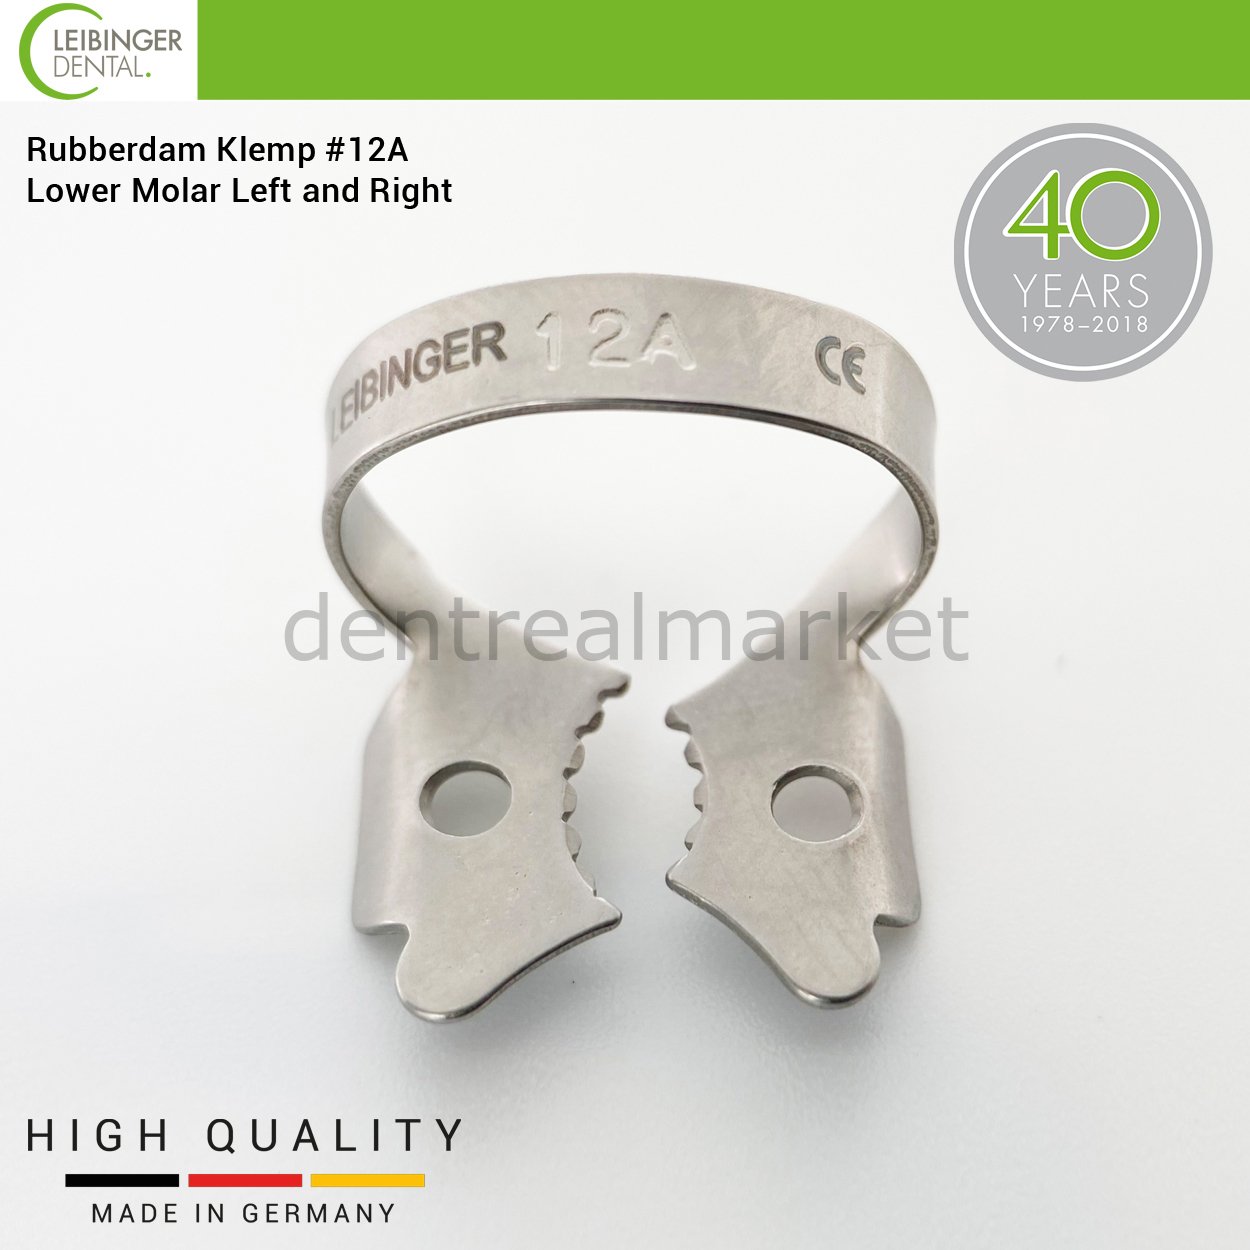 Rubberdam Klemp #12A - Lower Molar Left and Right